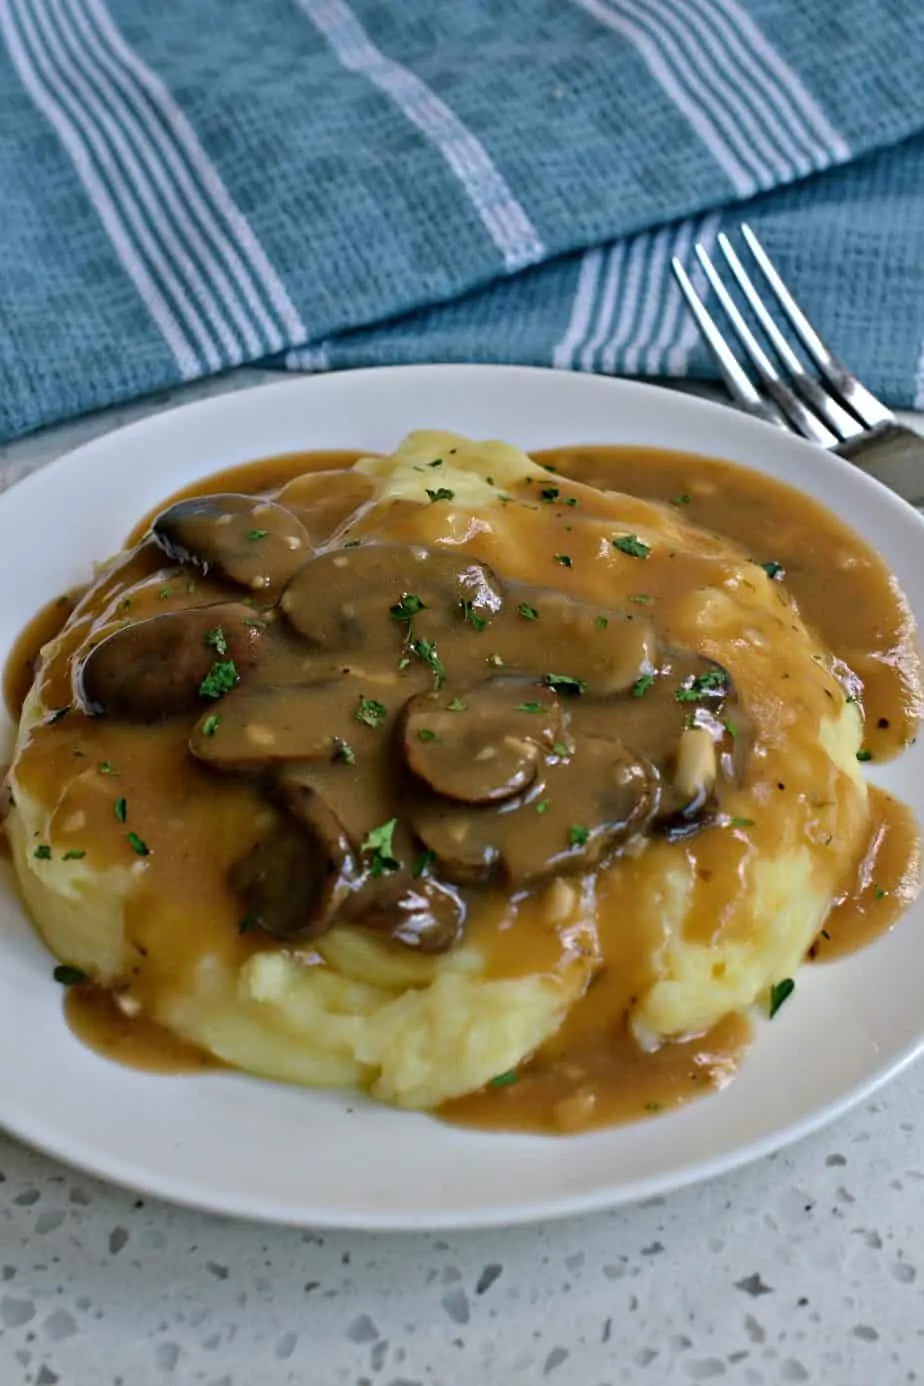 This super easy rich and flavorful Mushroom Gravy comes together with six ingredients in less than thirty minutes.